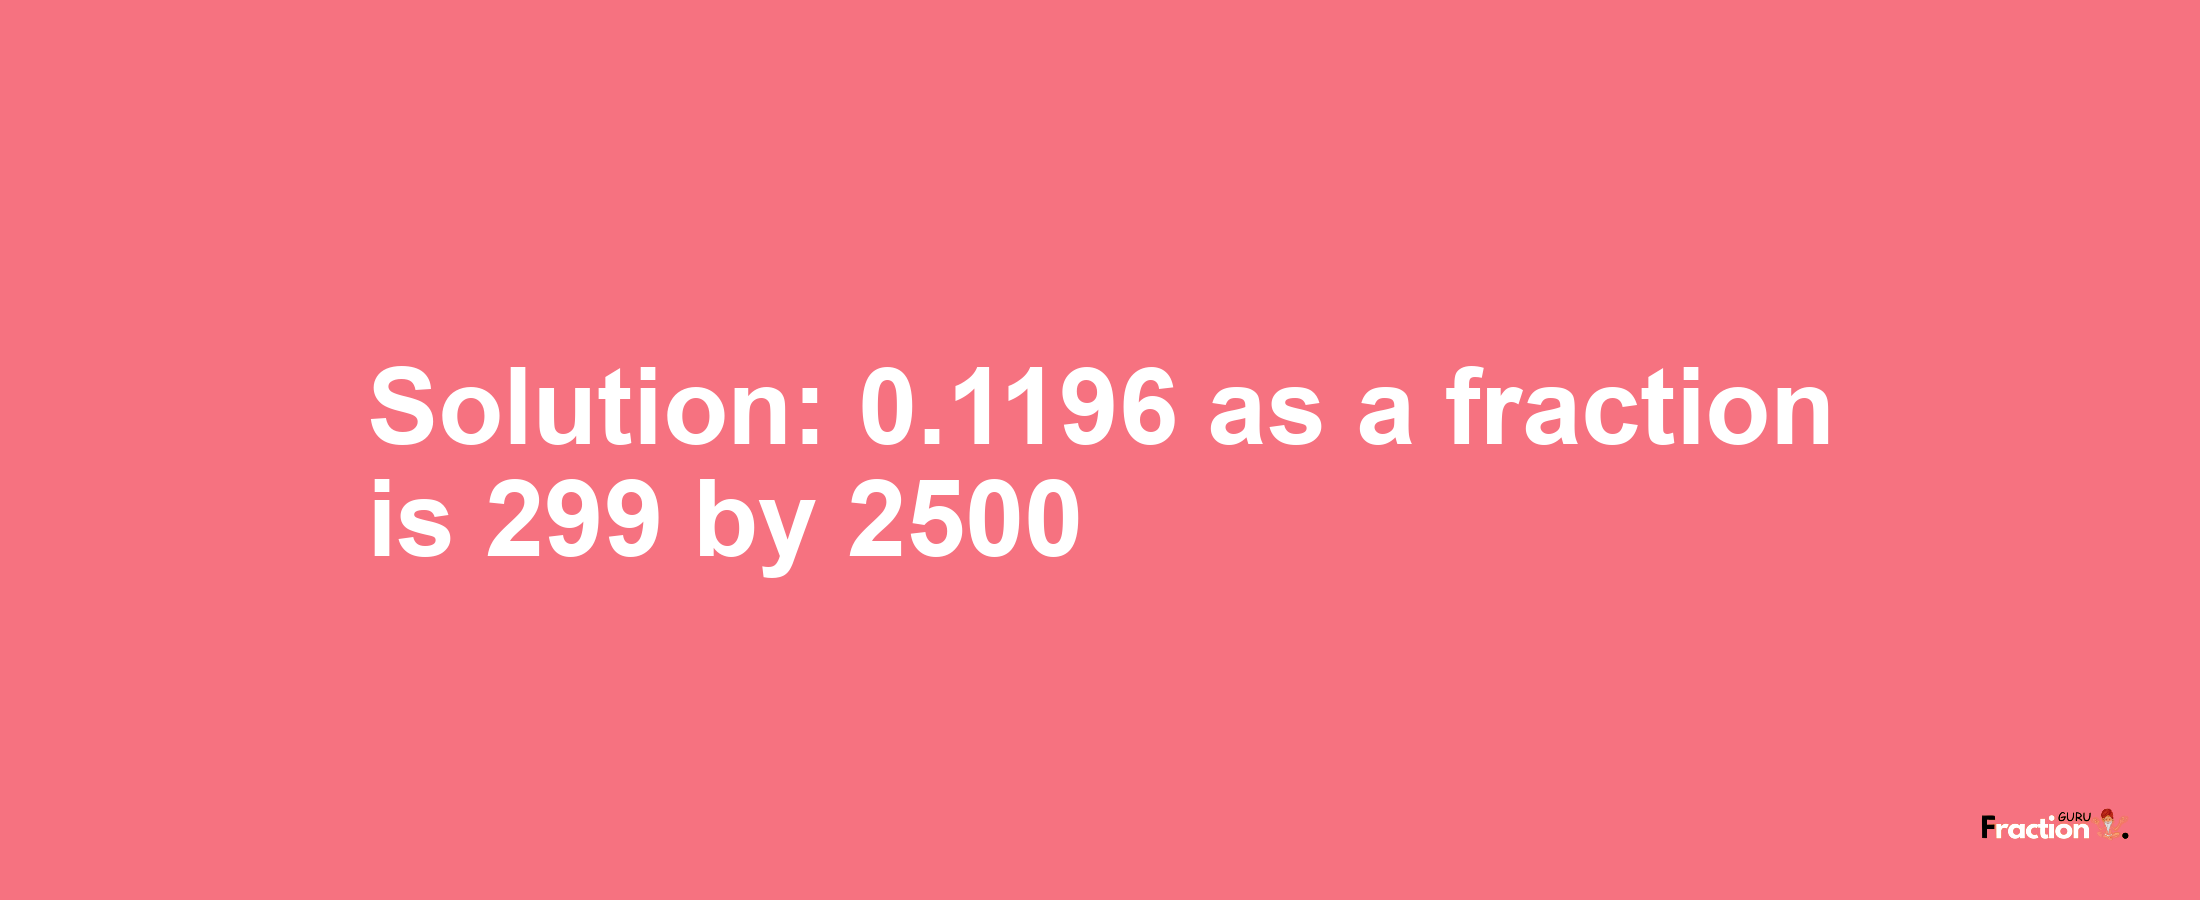 Solution:0.1196 as a fraction is 299/2500